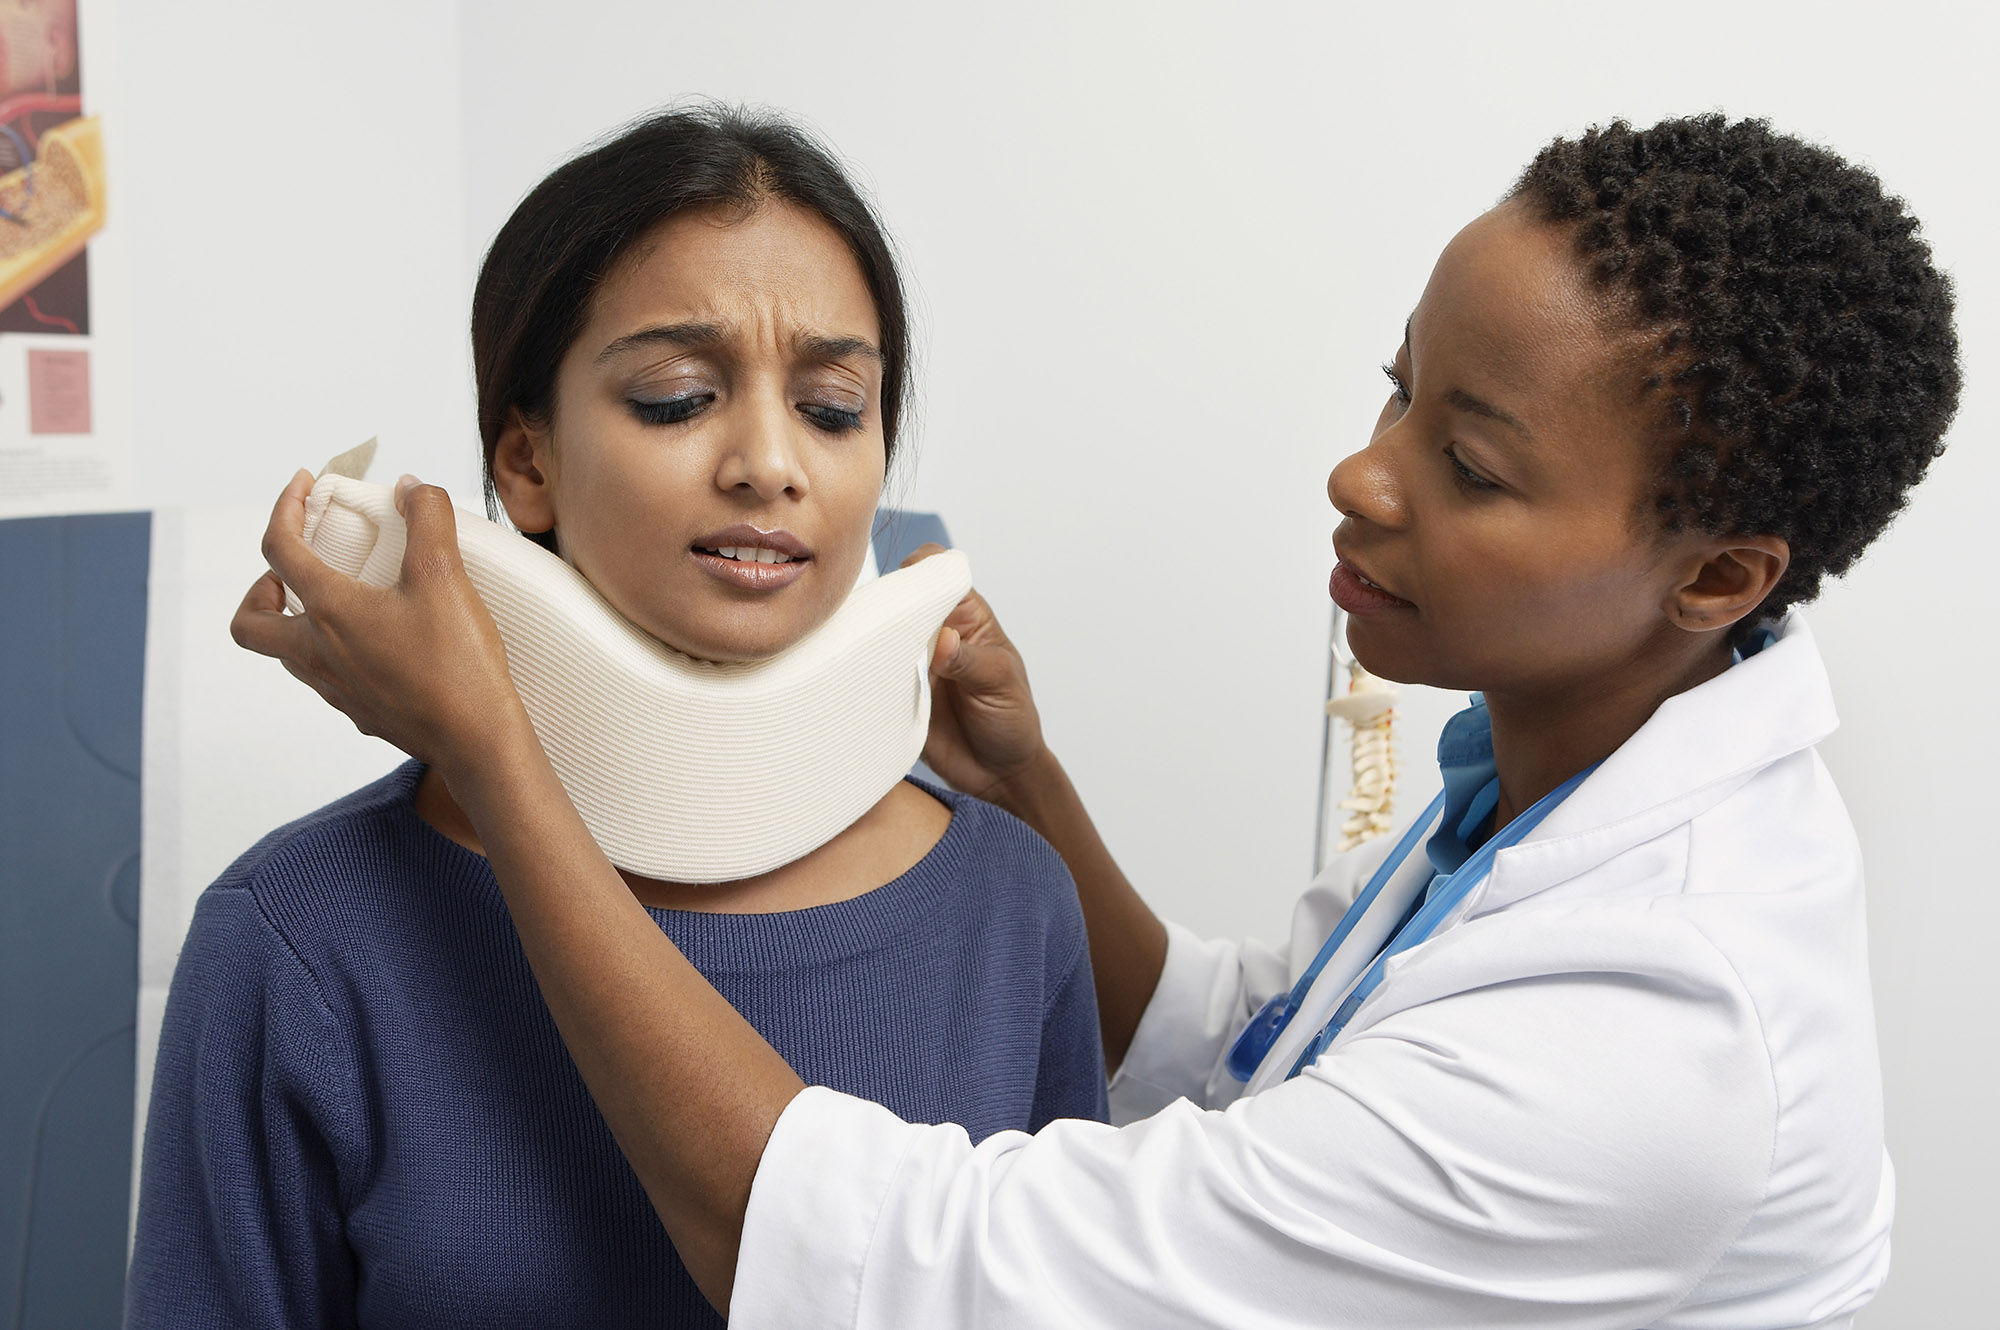 neck injury compensation solicitors Cardiff